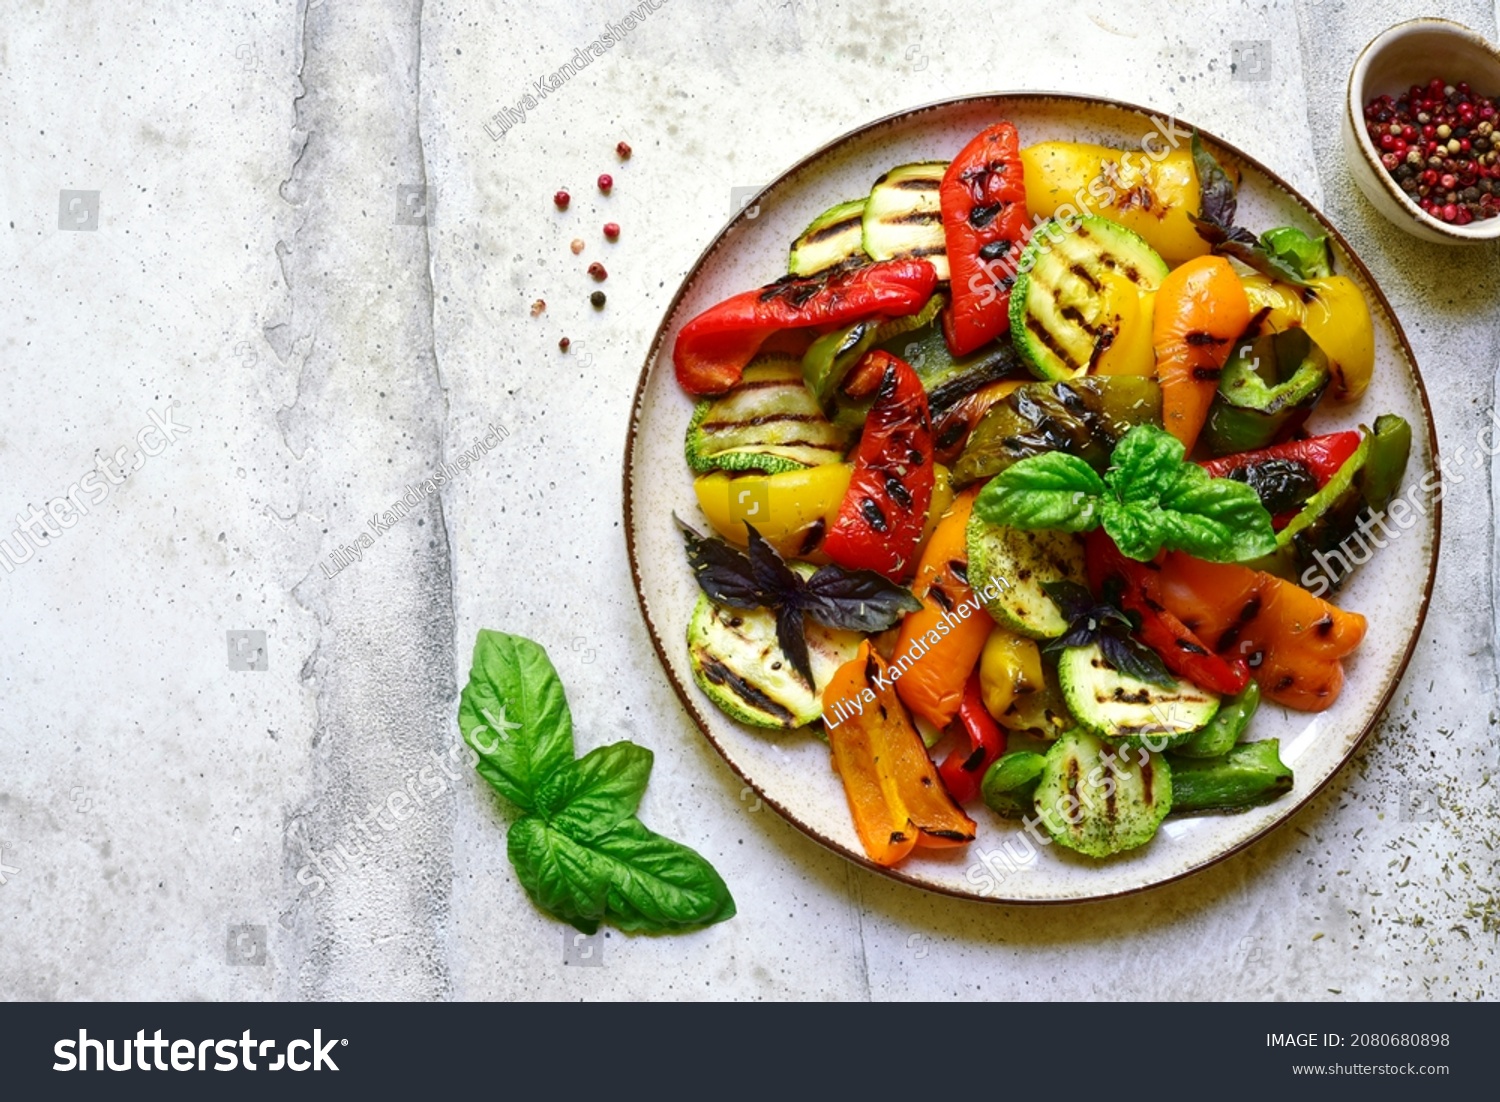 Grilled colorful vegetable : bell pepper, zucchini, eggplant on a plate over light grey slate, stone or concrete background. Top view with copy space. #2080680898